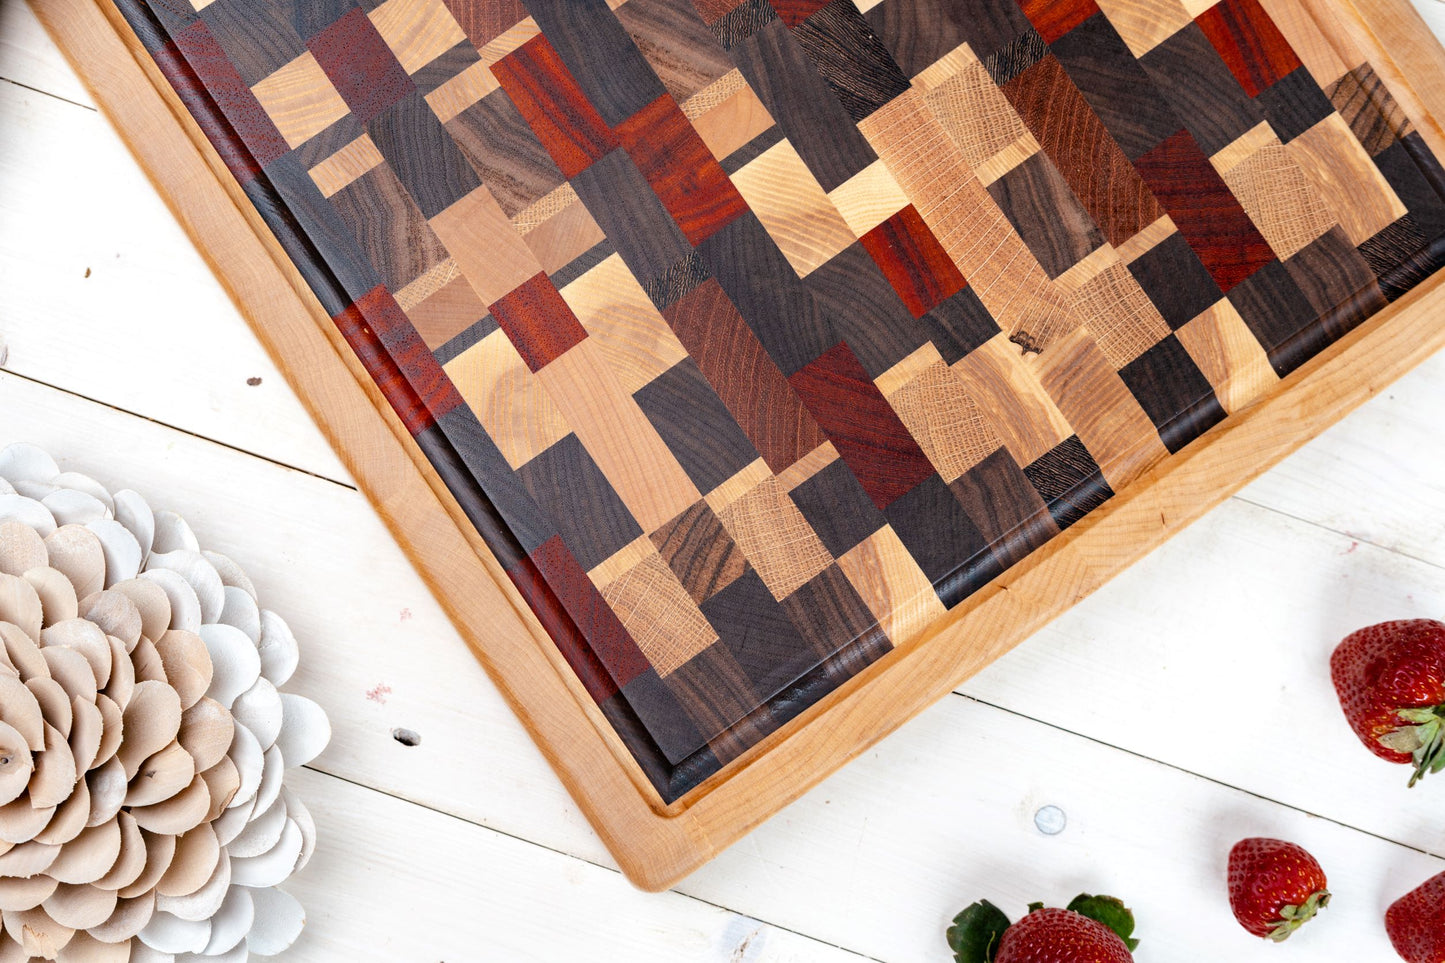 Chaos Design Cutting Board with Maple Wood Frame